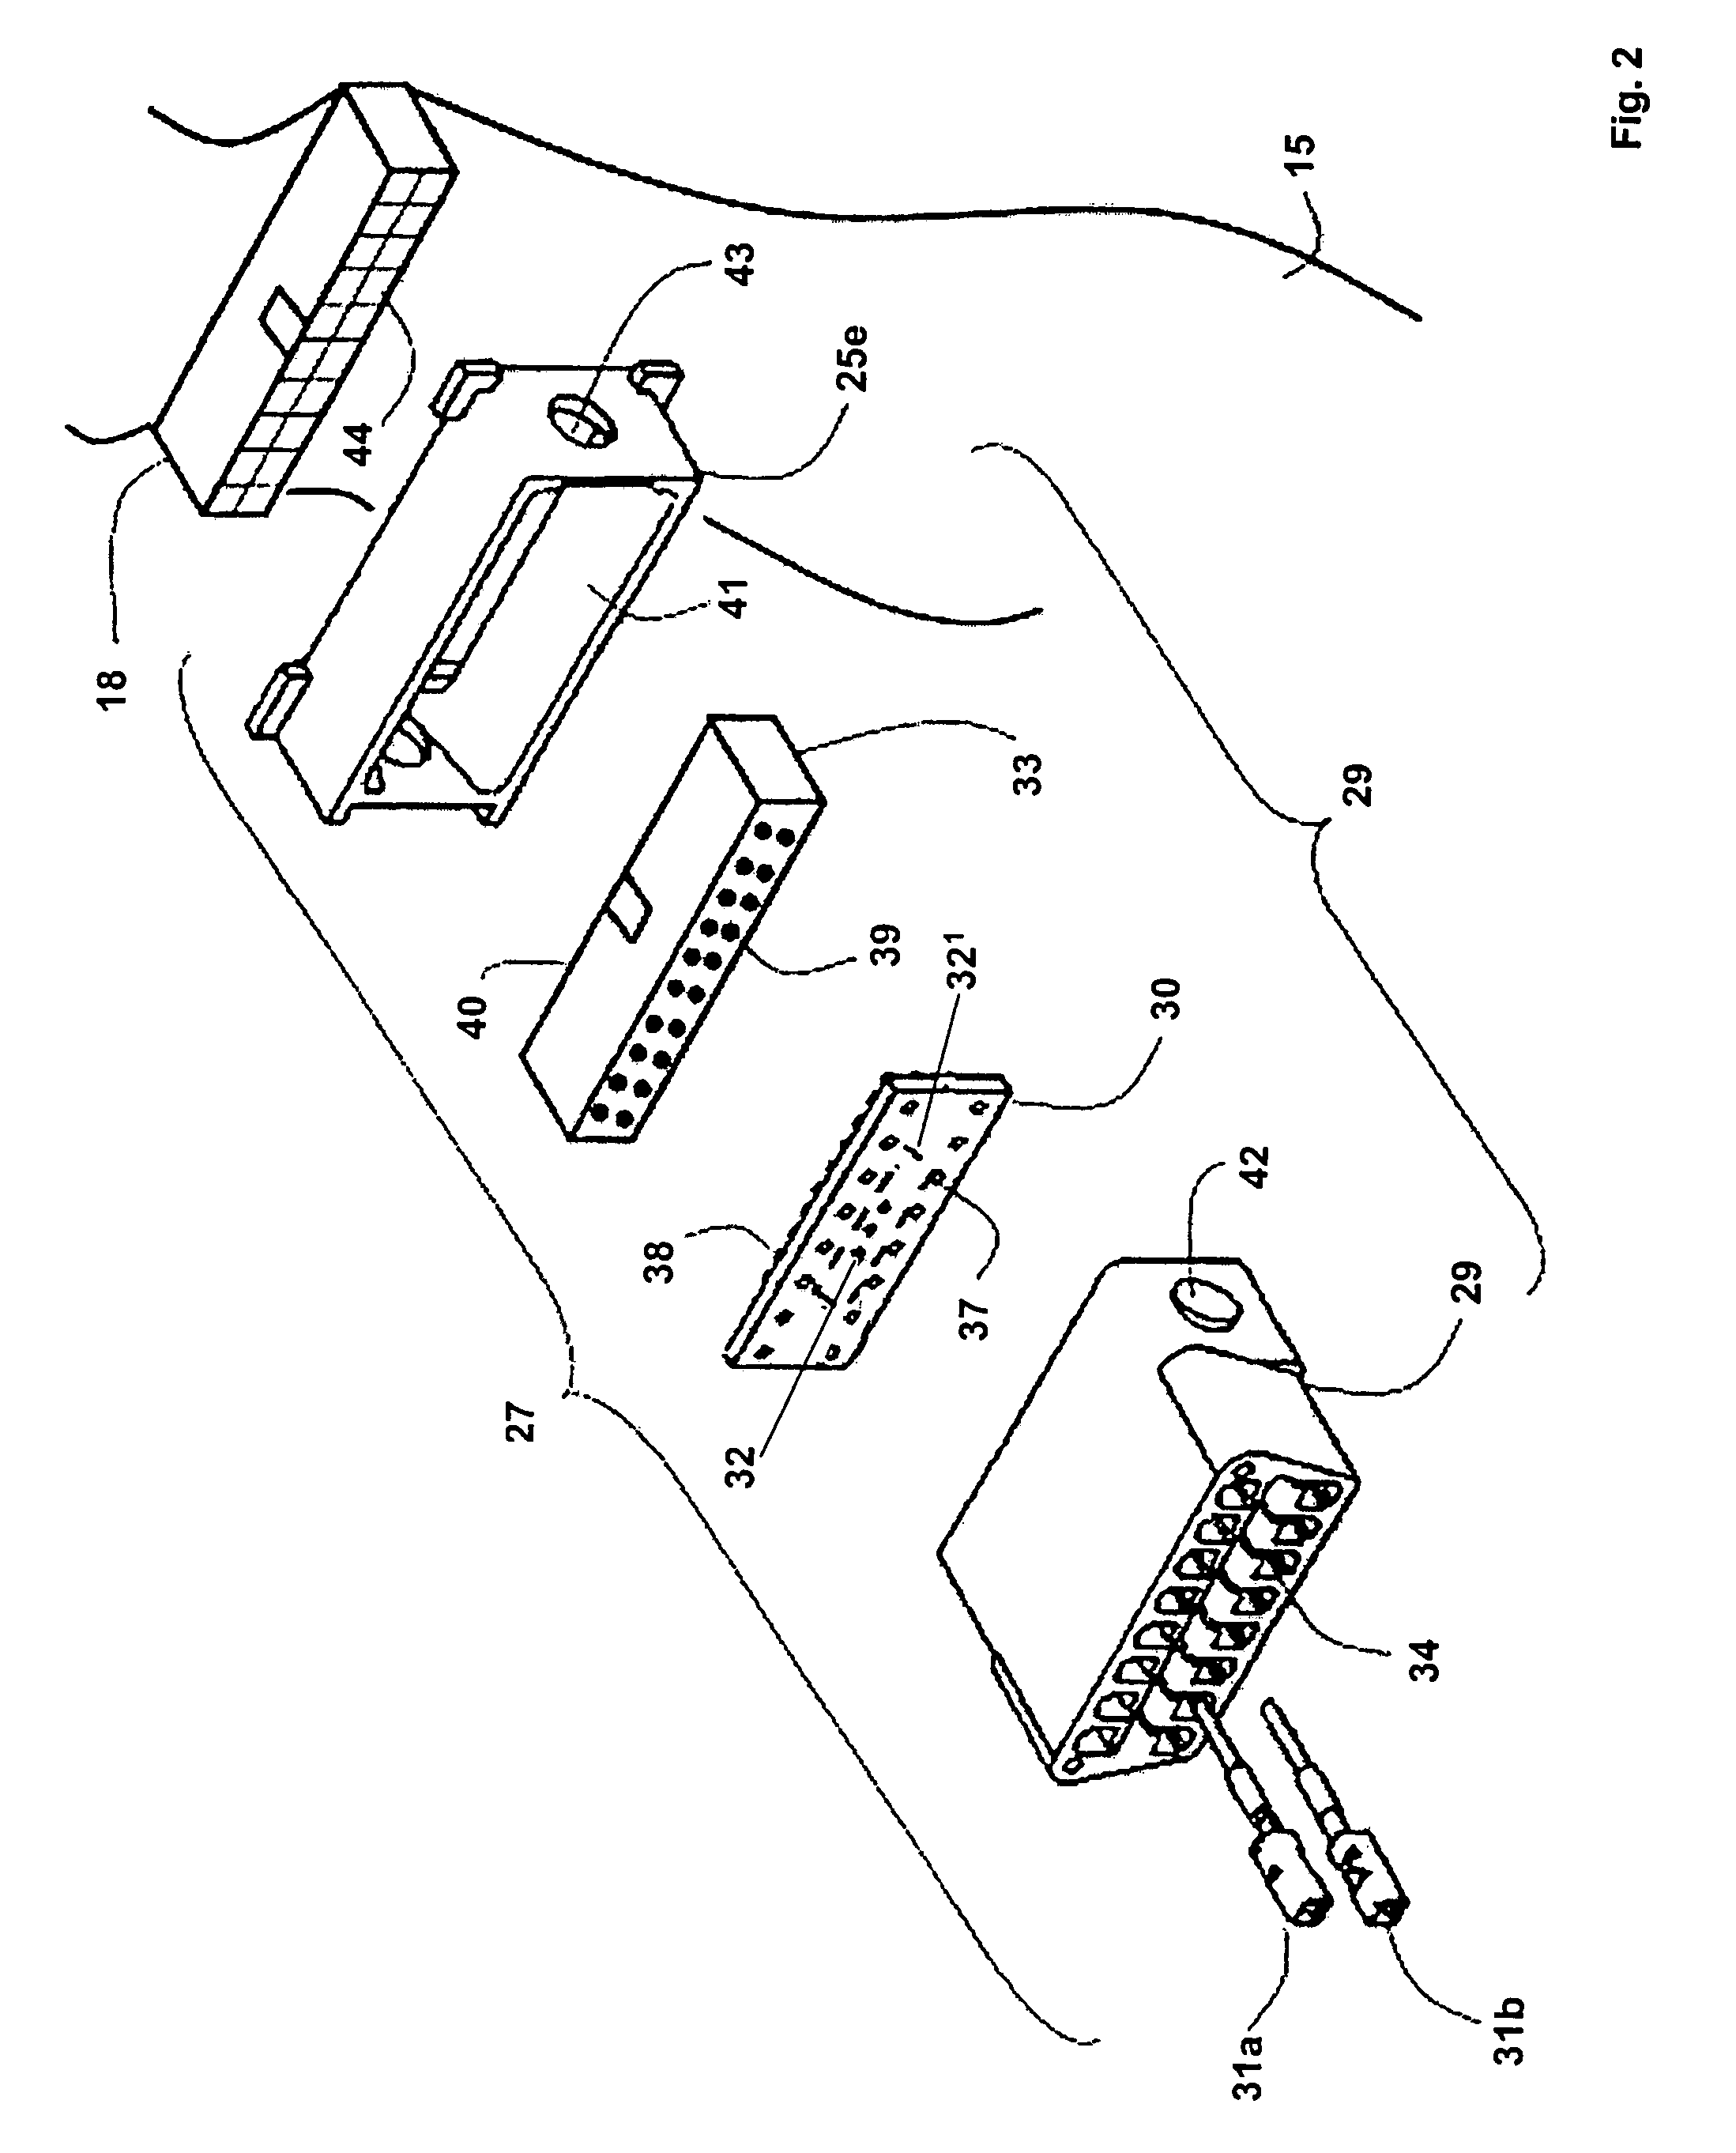 In-vehicle wiring harness with multiple adaptors for an on-board diagnostic connector